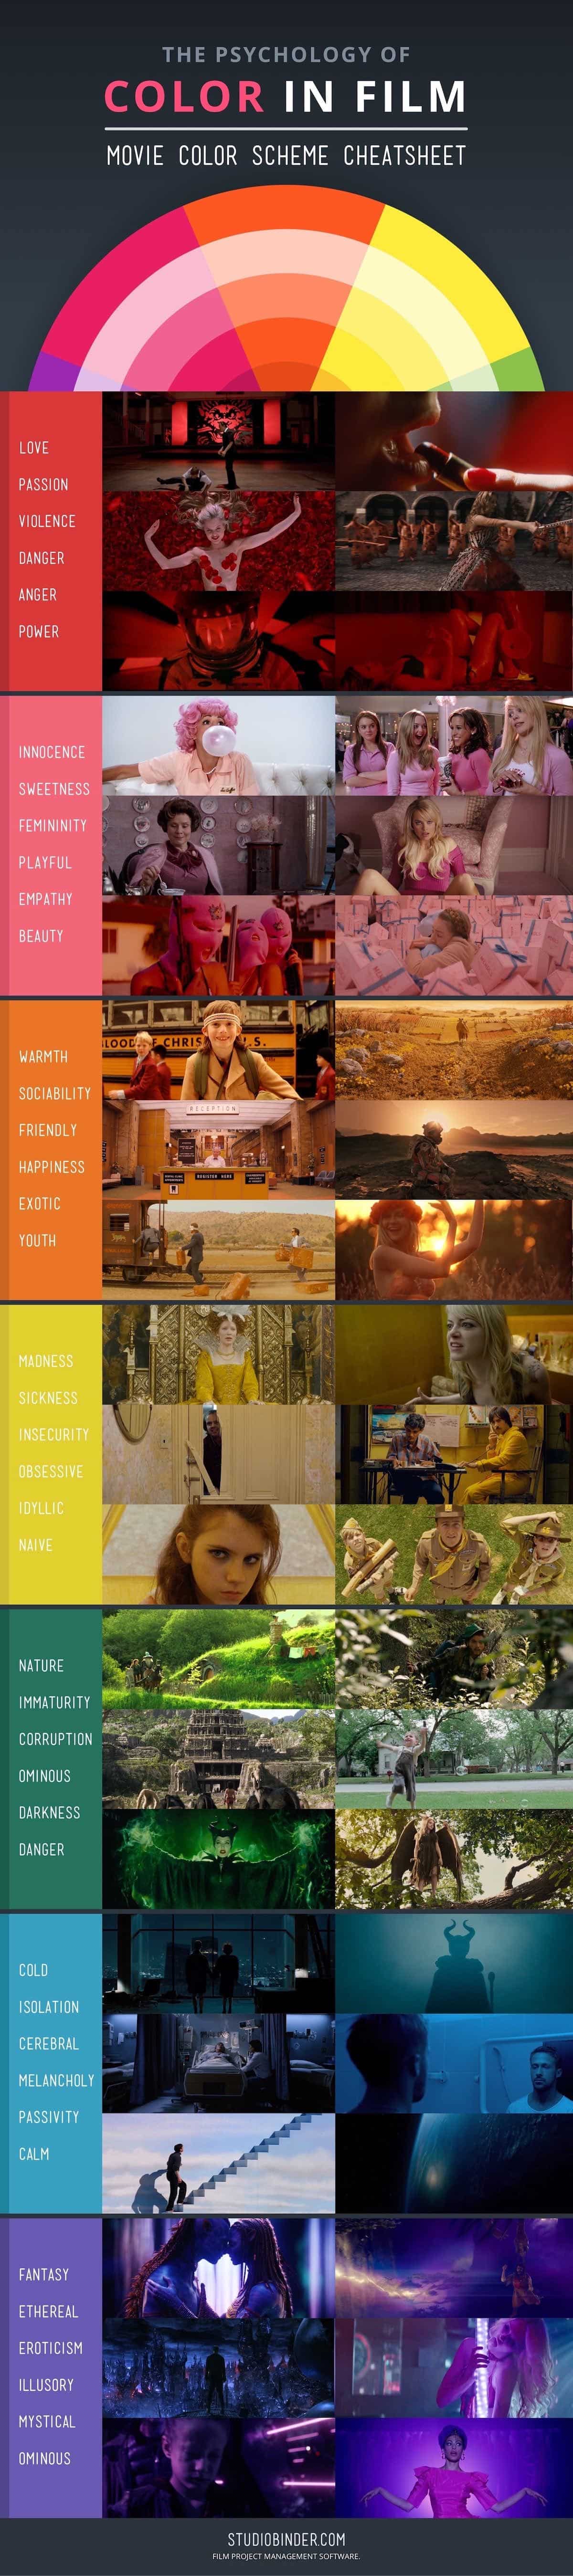 How to Use Color in Film - Movie Color Palettes - Cheatsheet - StudioBinder